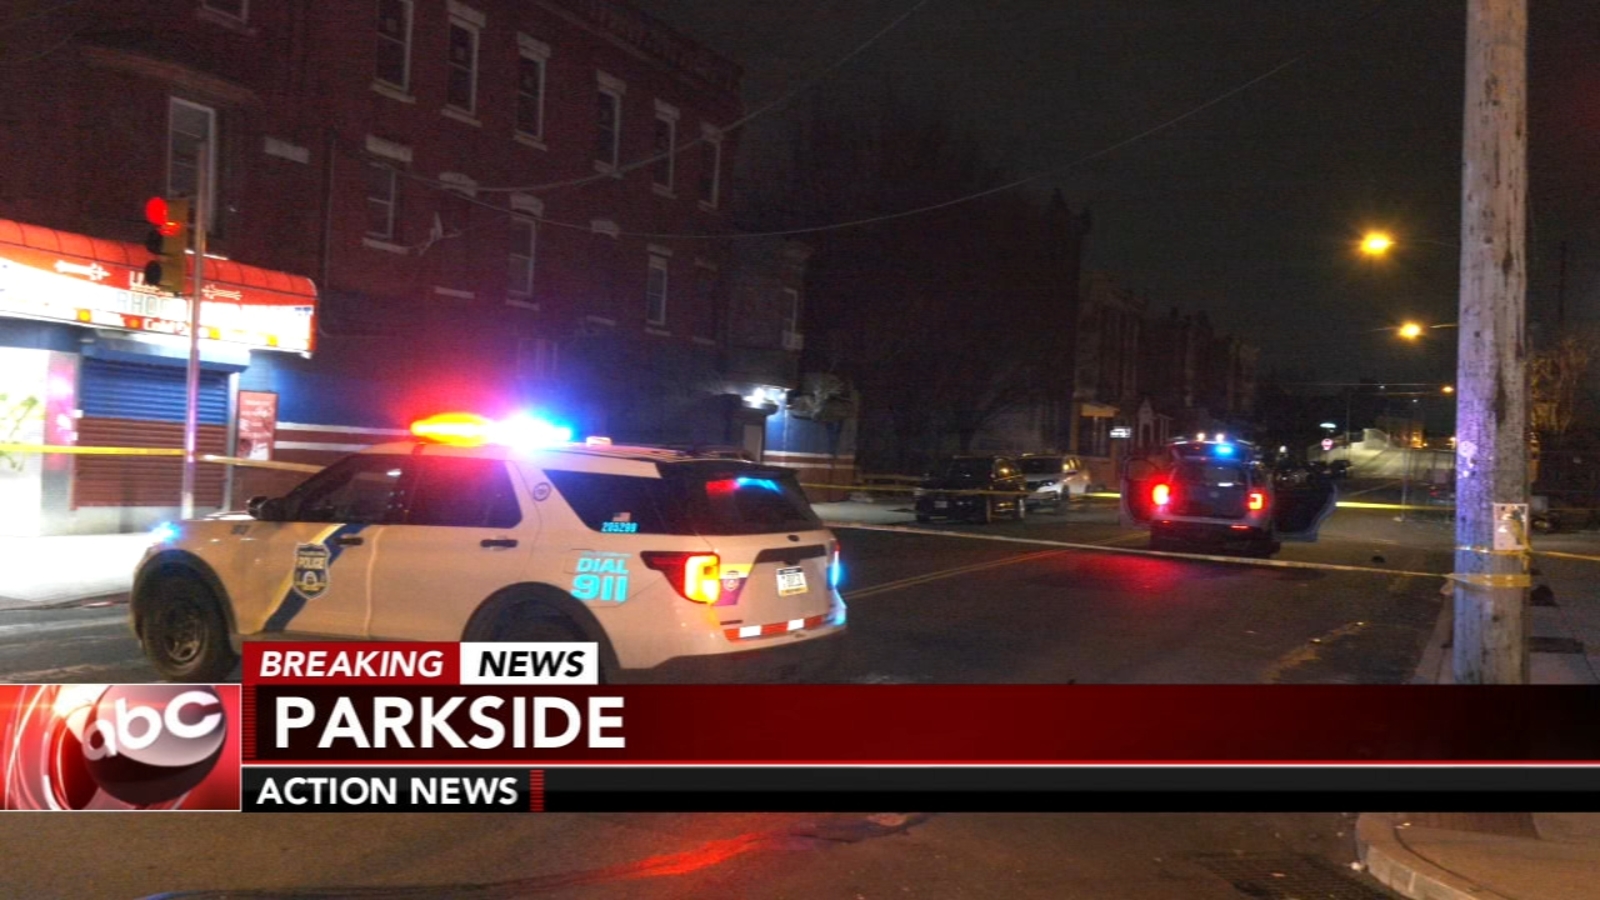 Police: 26-year-old man shot 12 times in Parkside shooting